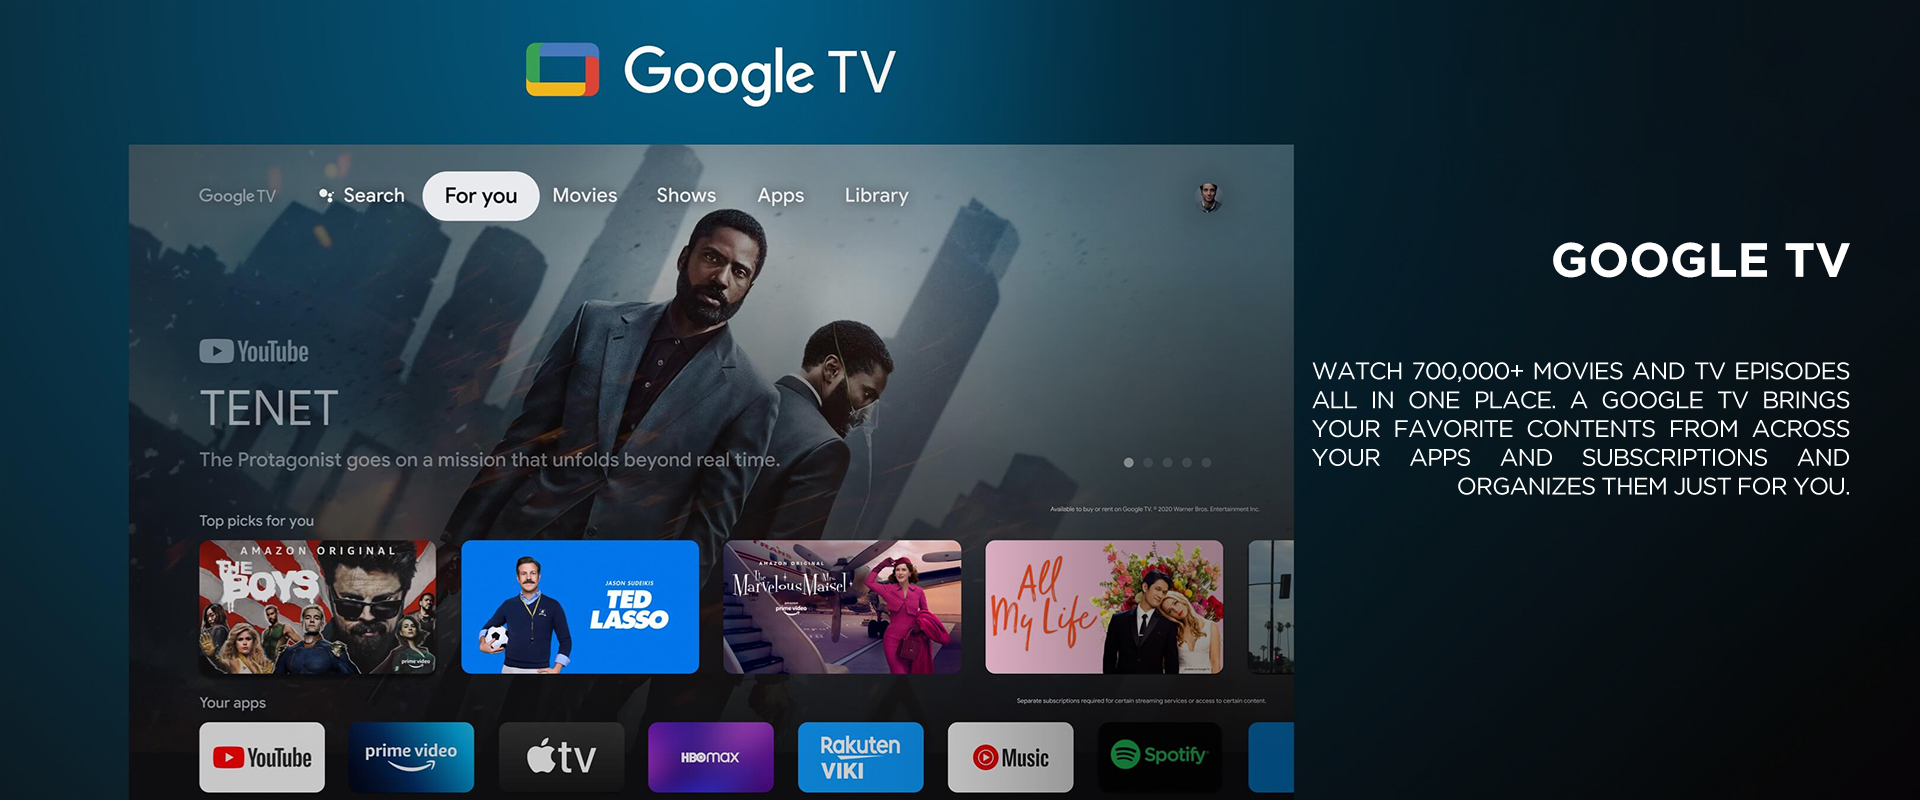 GOOGLE TV - Watch 700,000+ movies and TV episodes all in one place. A Google TV brings your favorite contents from across your apps and subscriptions and organizes them just for you.